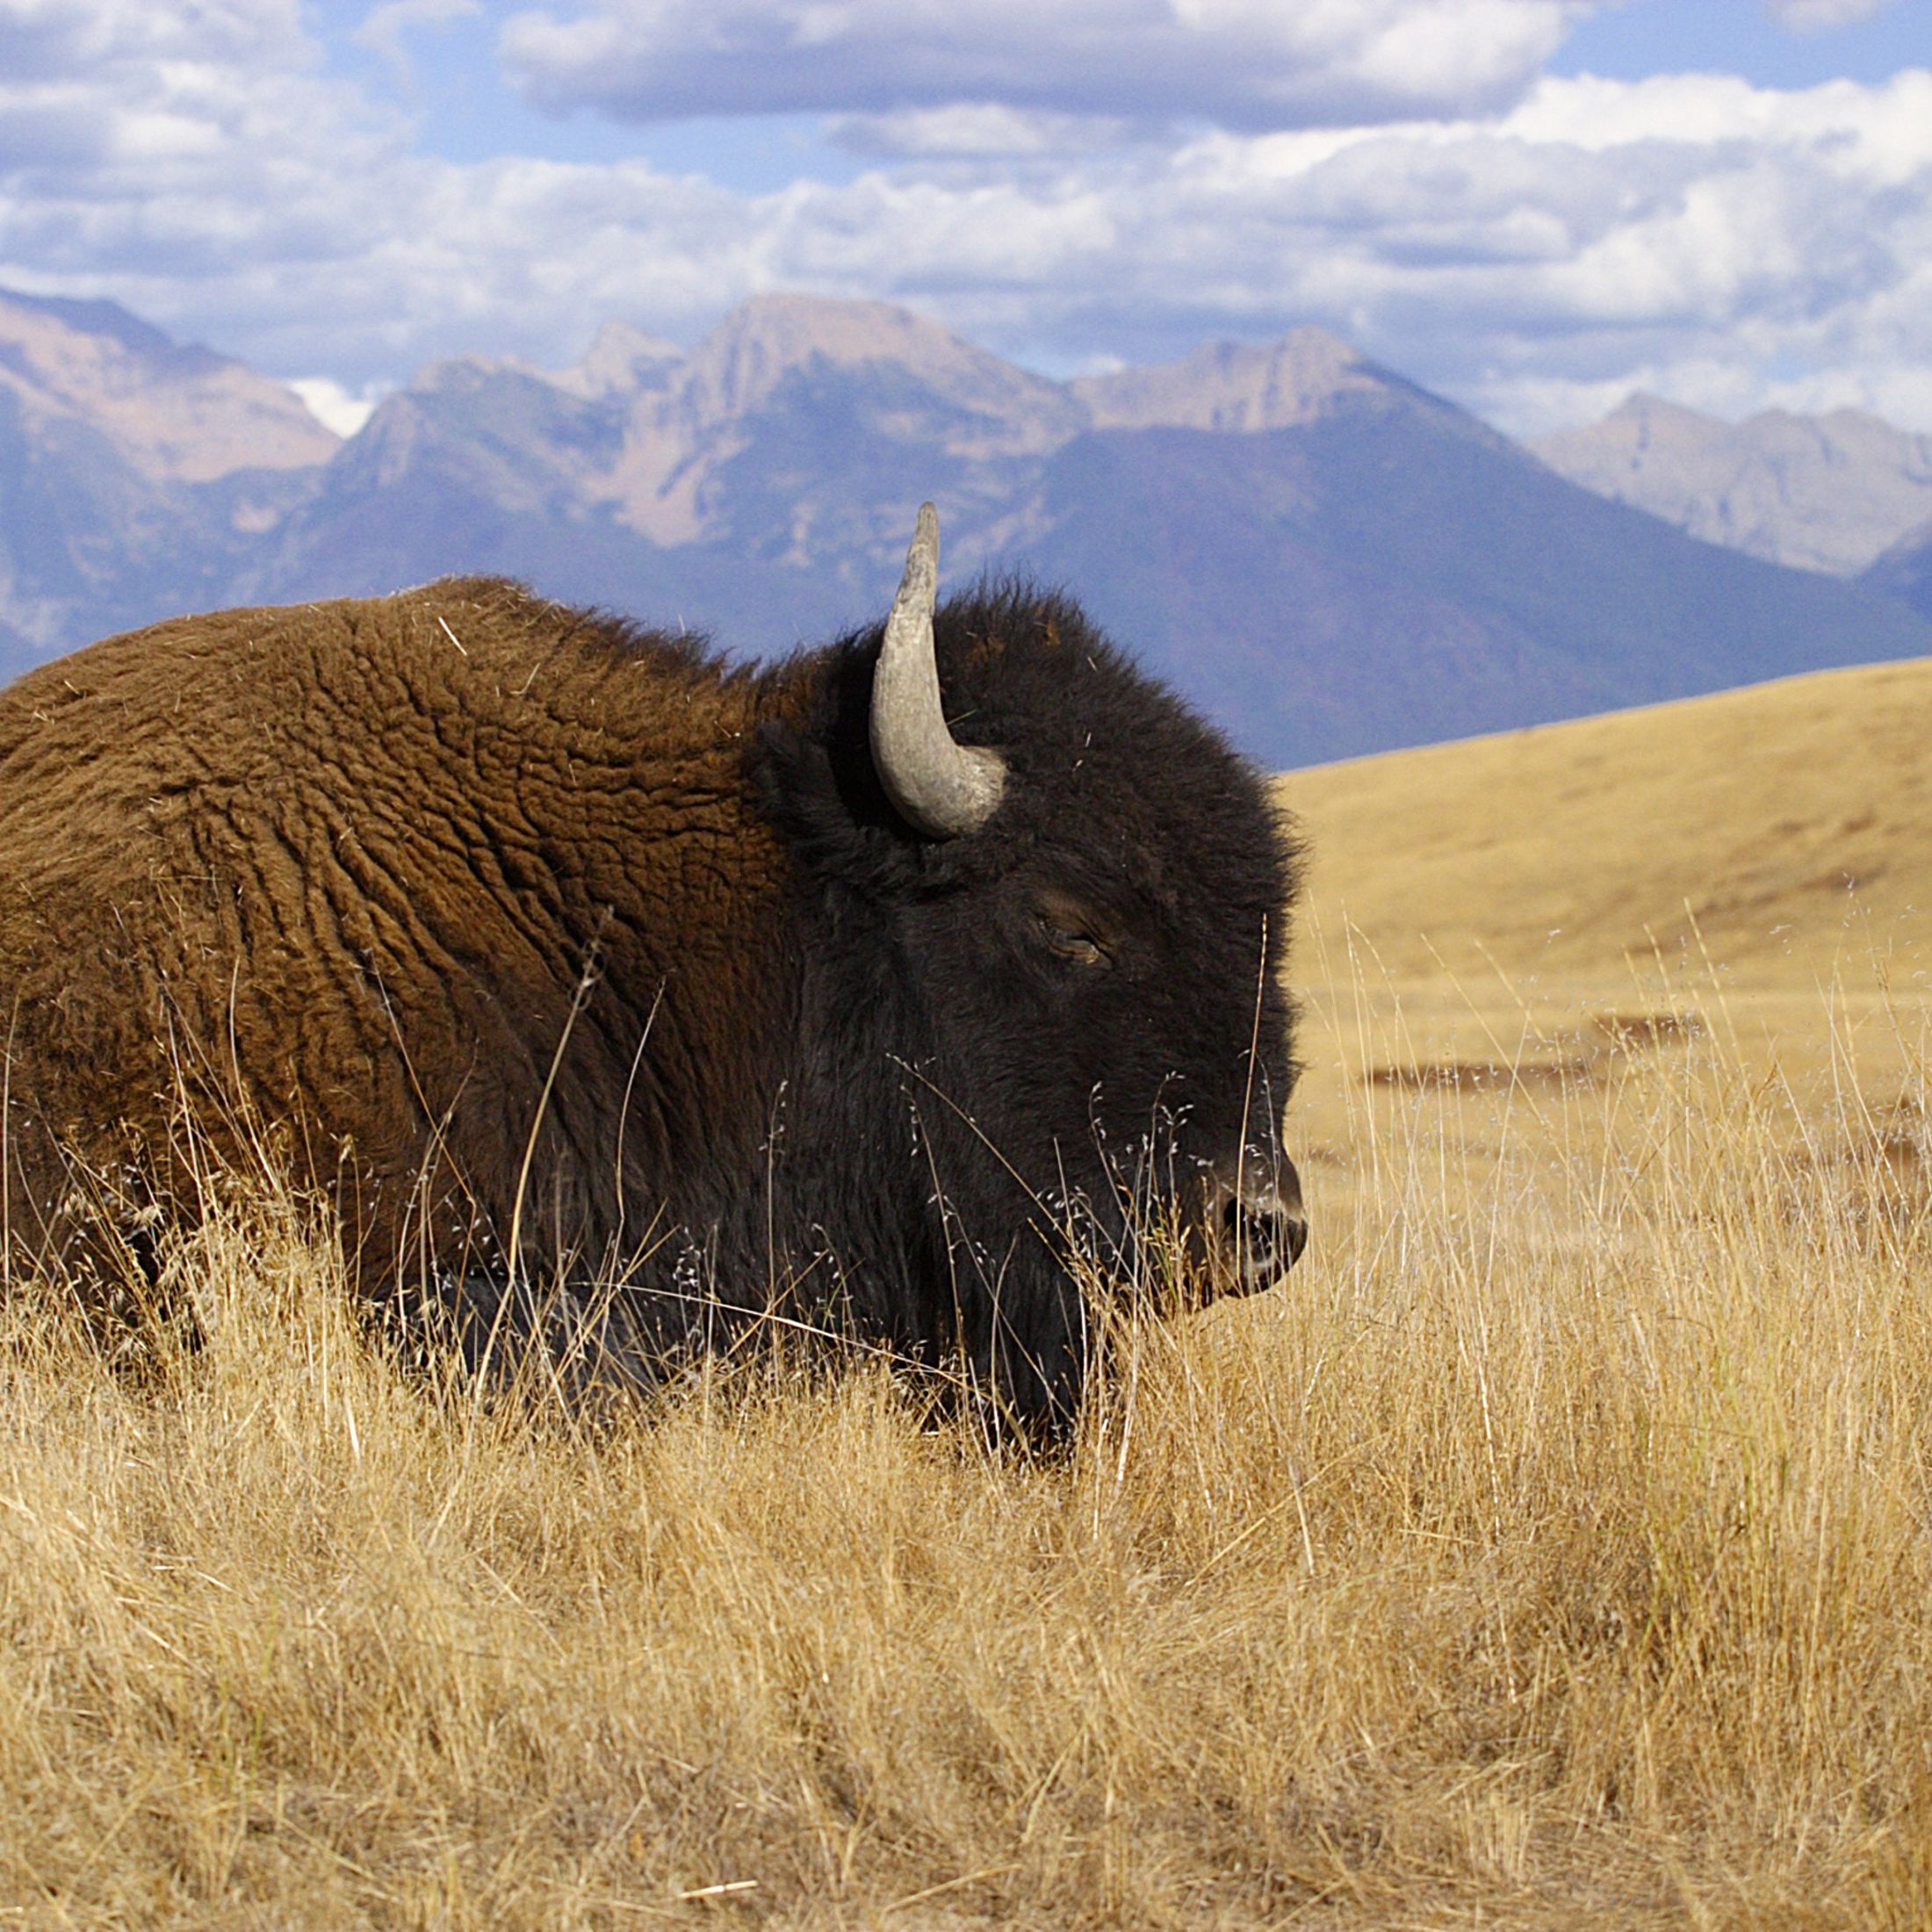 Bison up close laying in tall grass with mountains in the backdrop.